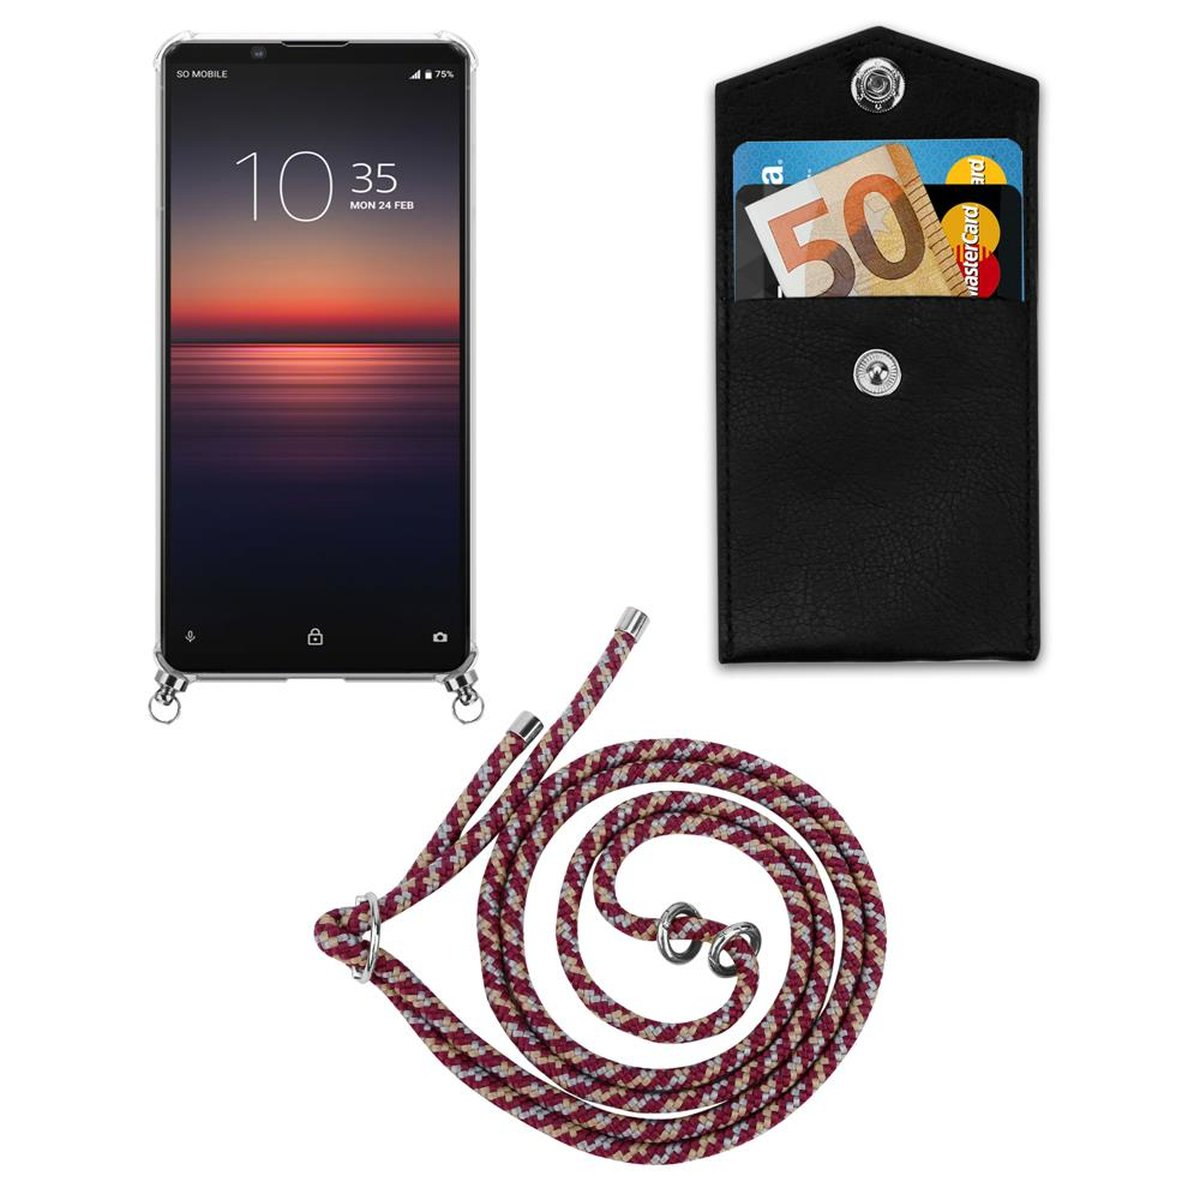 1 mit Backcover, Sony, Handy abnehmbarer CADORABO II, Silber Ringen, Hülle, Xperia Band Kordel und ROT Kette GELB WEIß